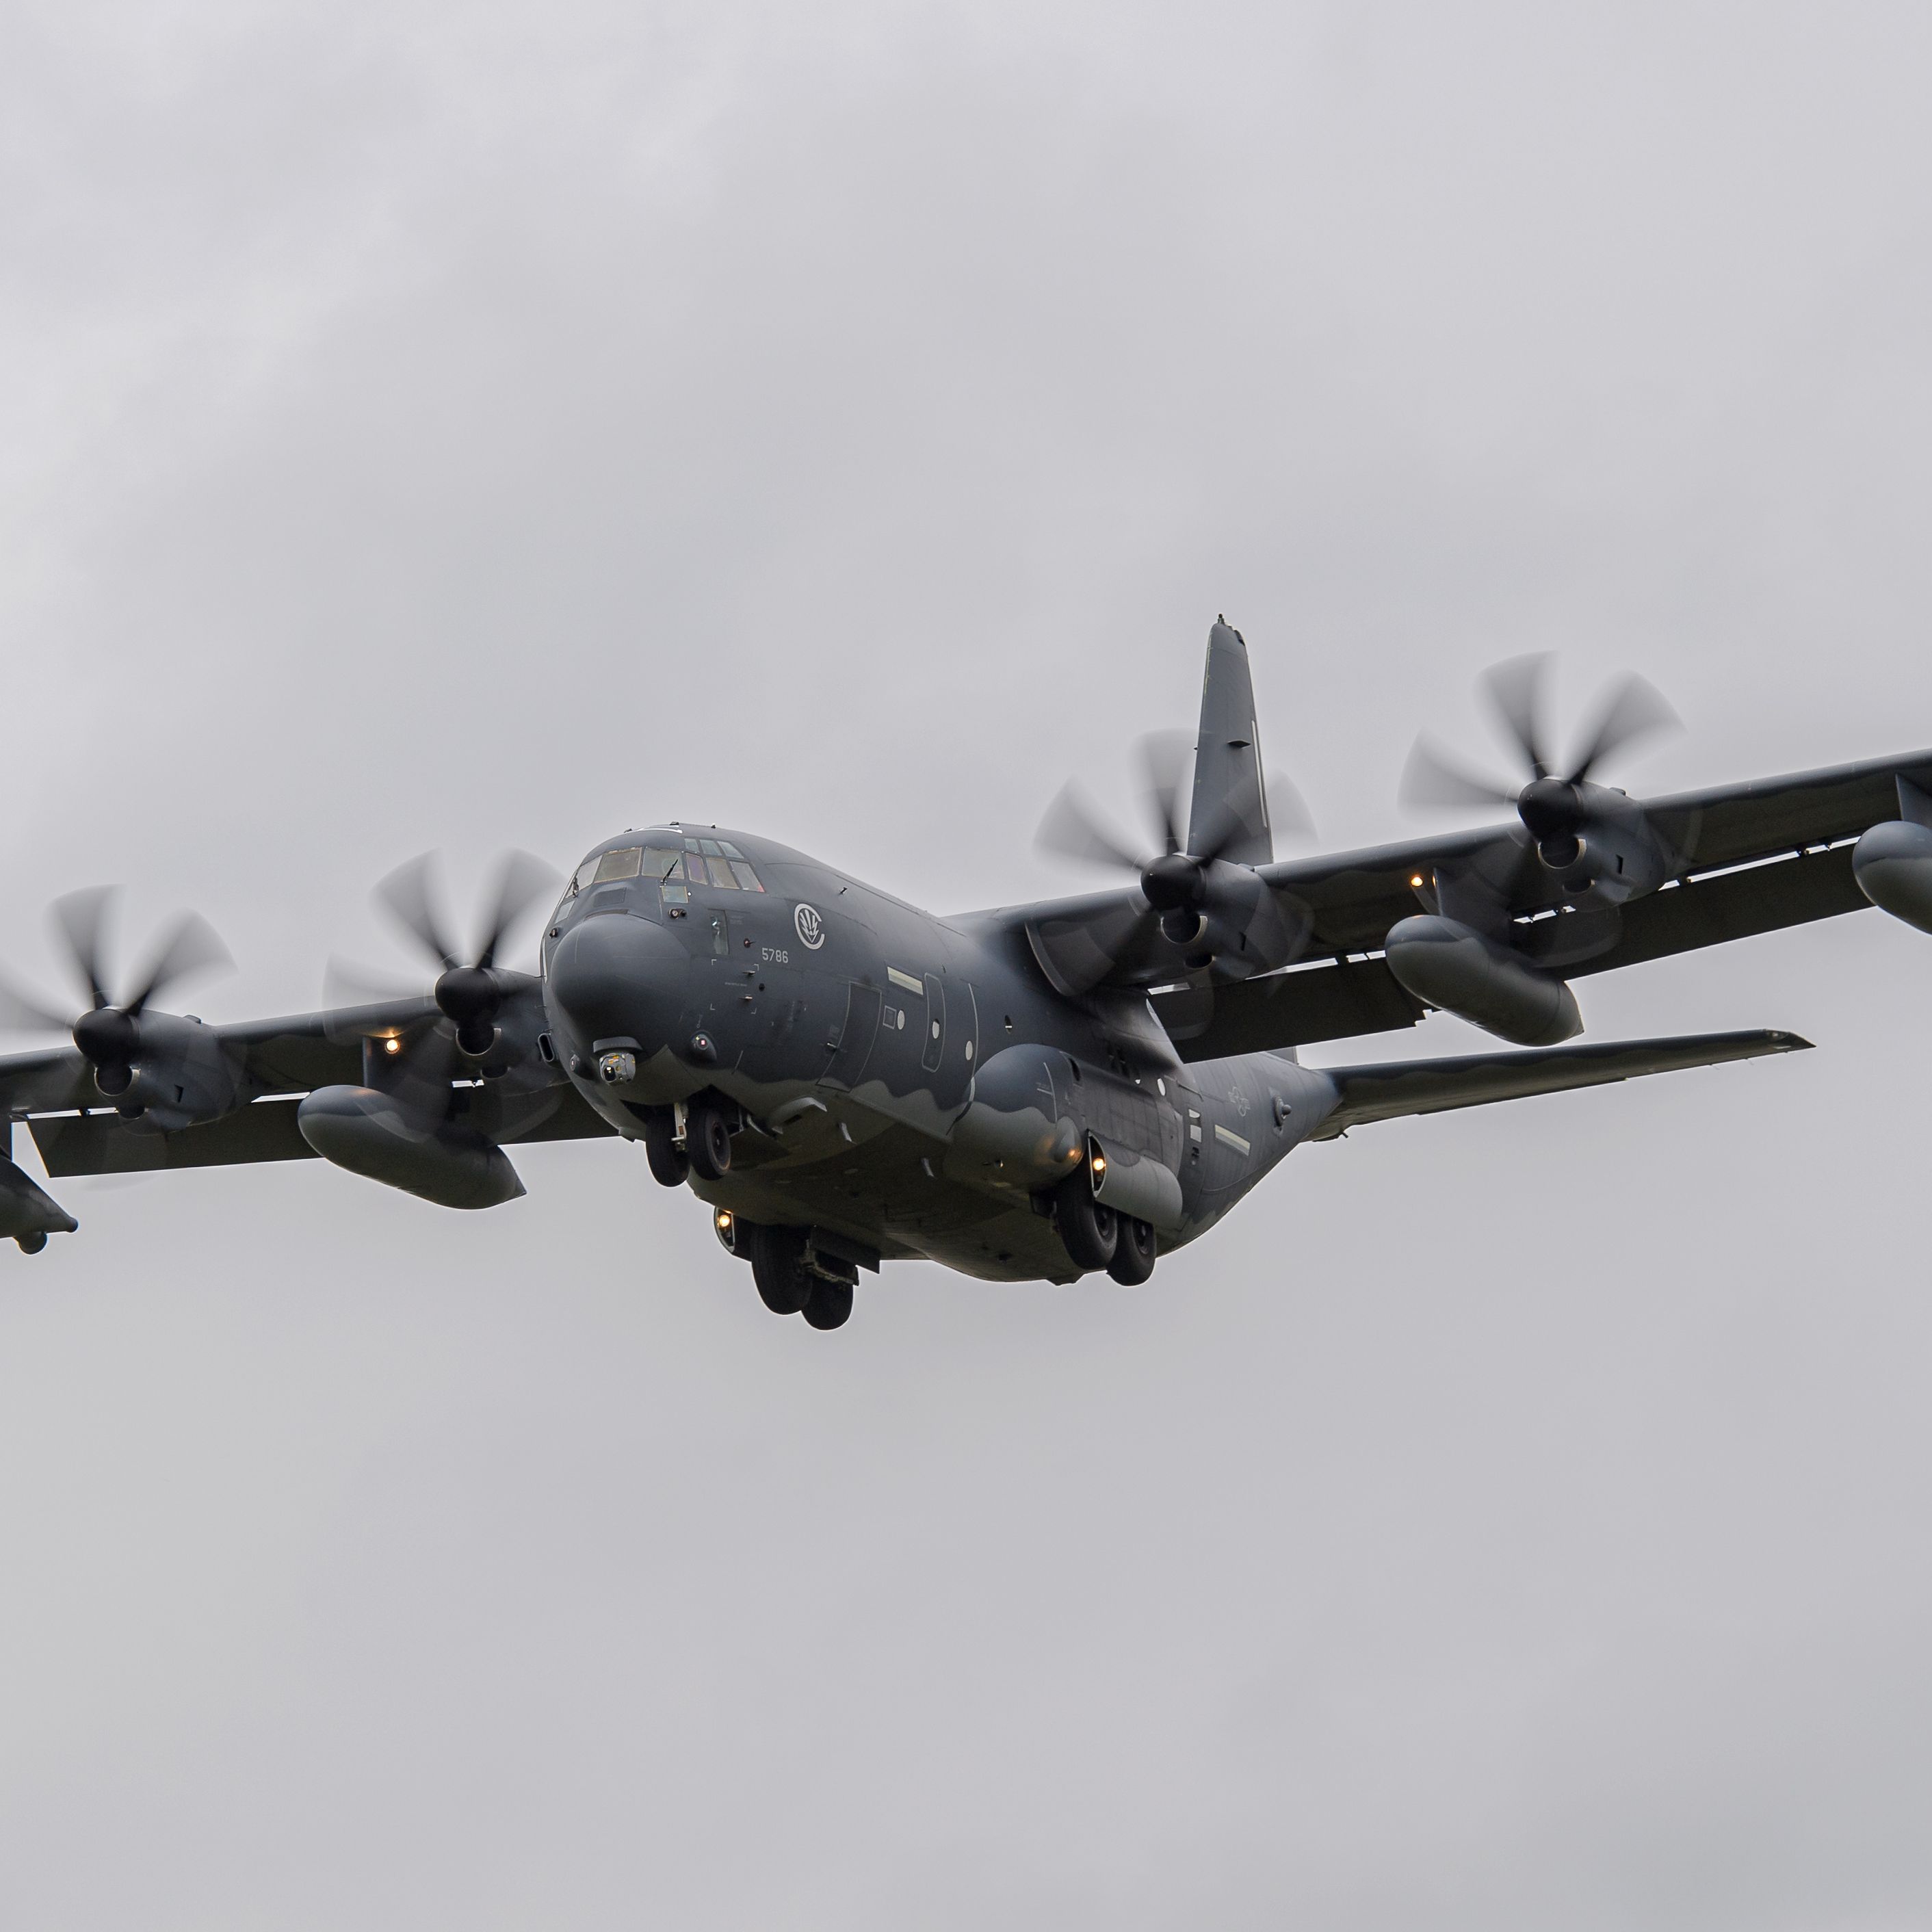 How the Air Force Turned a C-130 Cargo Plane Into a Missile-Slinging Bomber